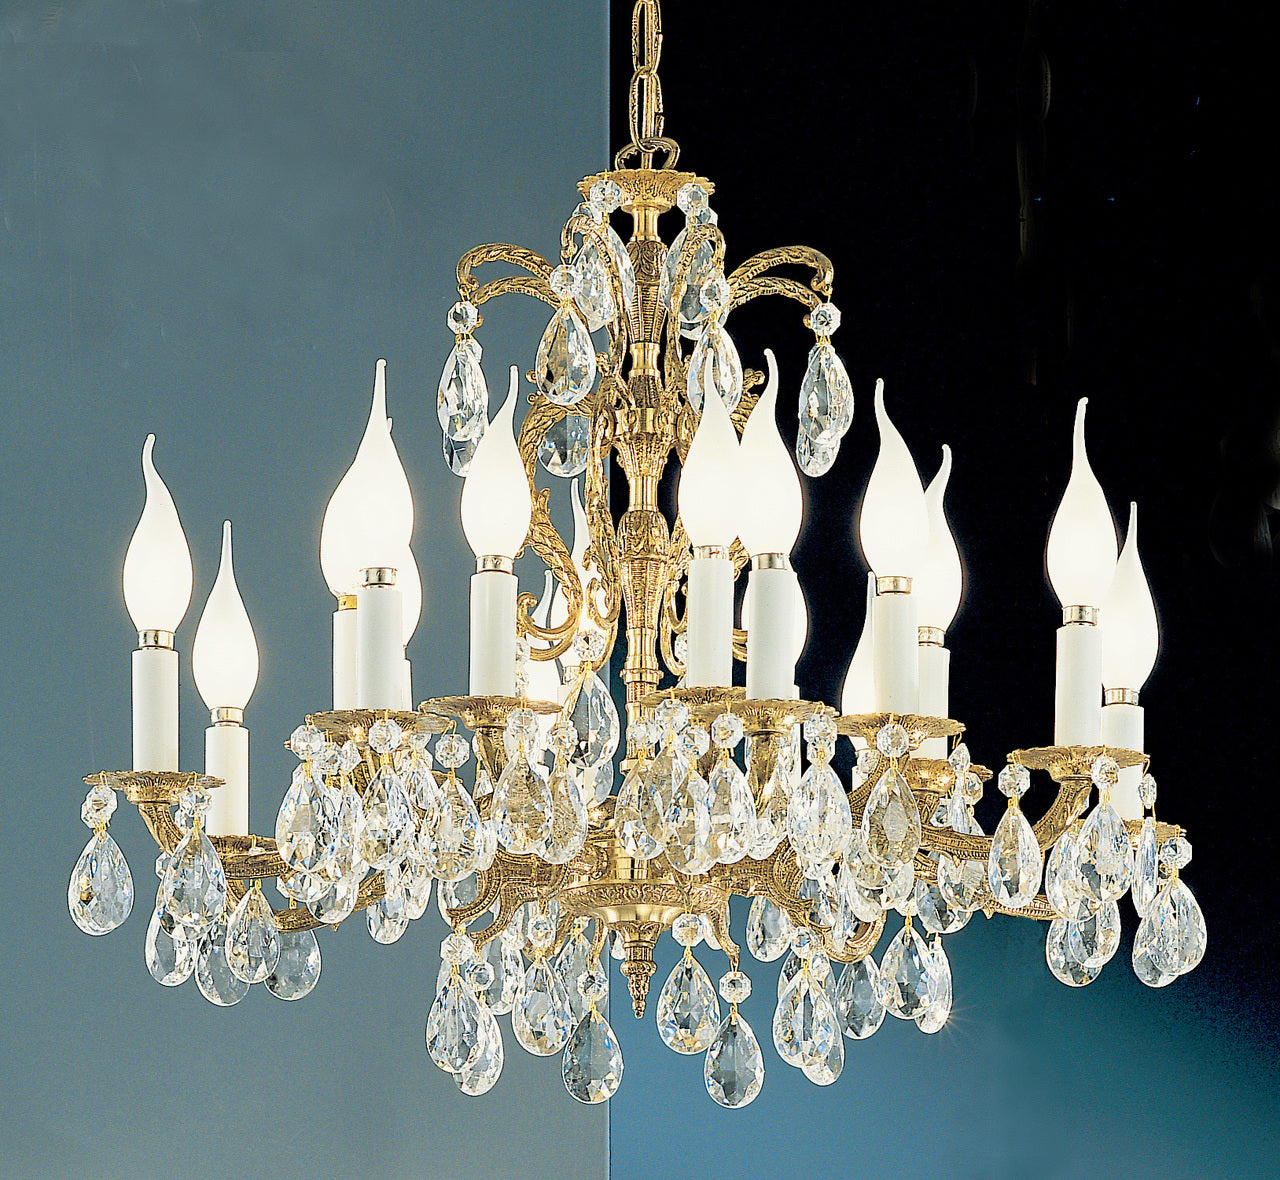 Classic Lighting 5216 OWB I Barcelona Crystal/Cast Brass Chandelier in Olde World Bronze (Imported from Spain)